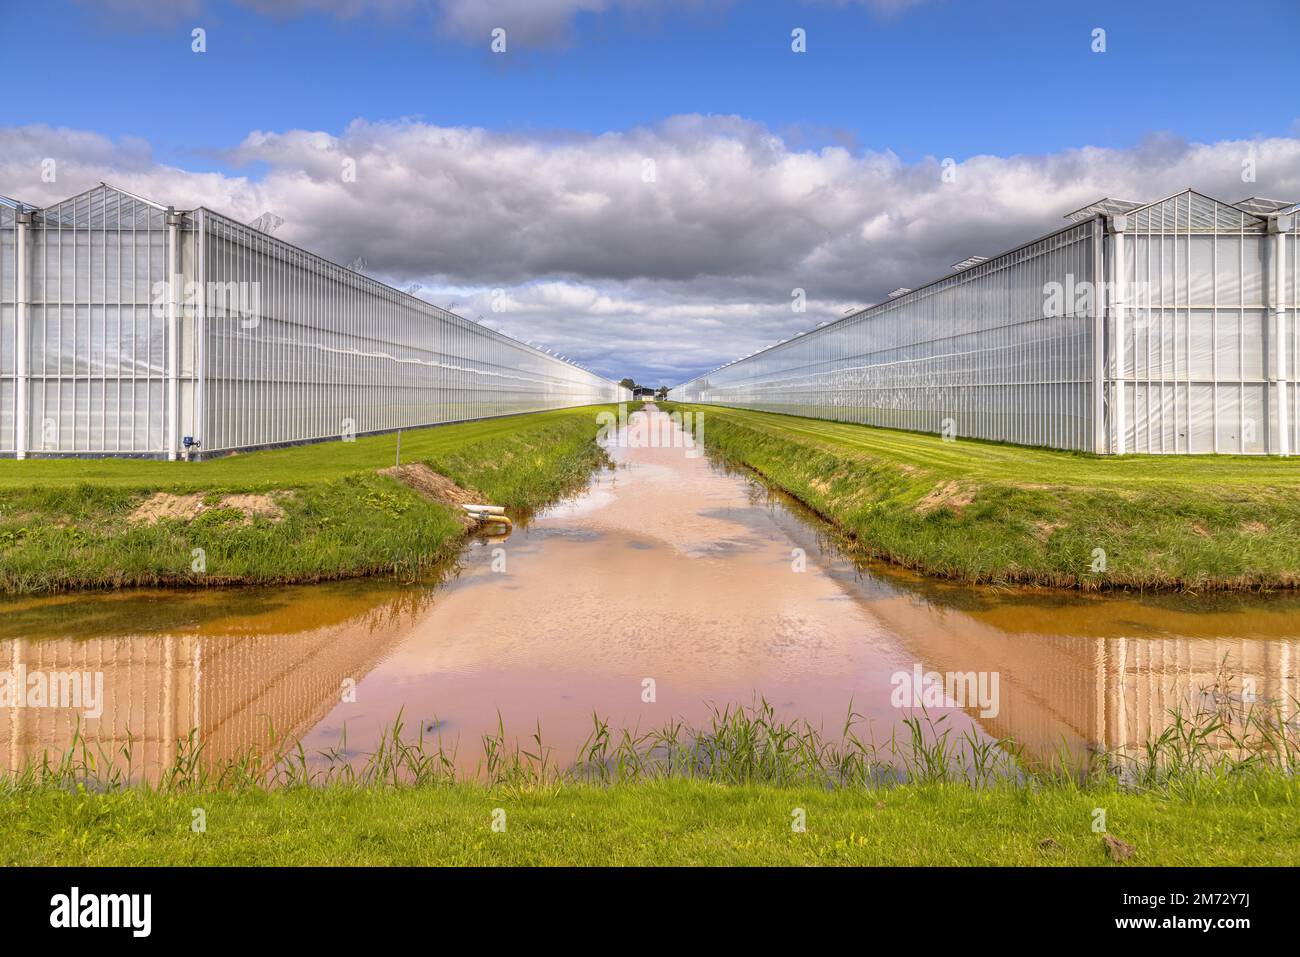 Greenhouse industrial exterior in the Netherlands. Food farming industry with giant buildings. Stock Photo